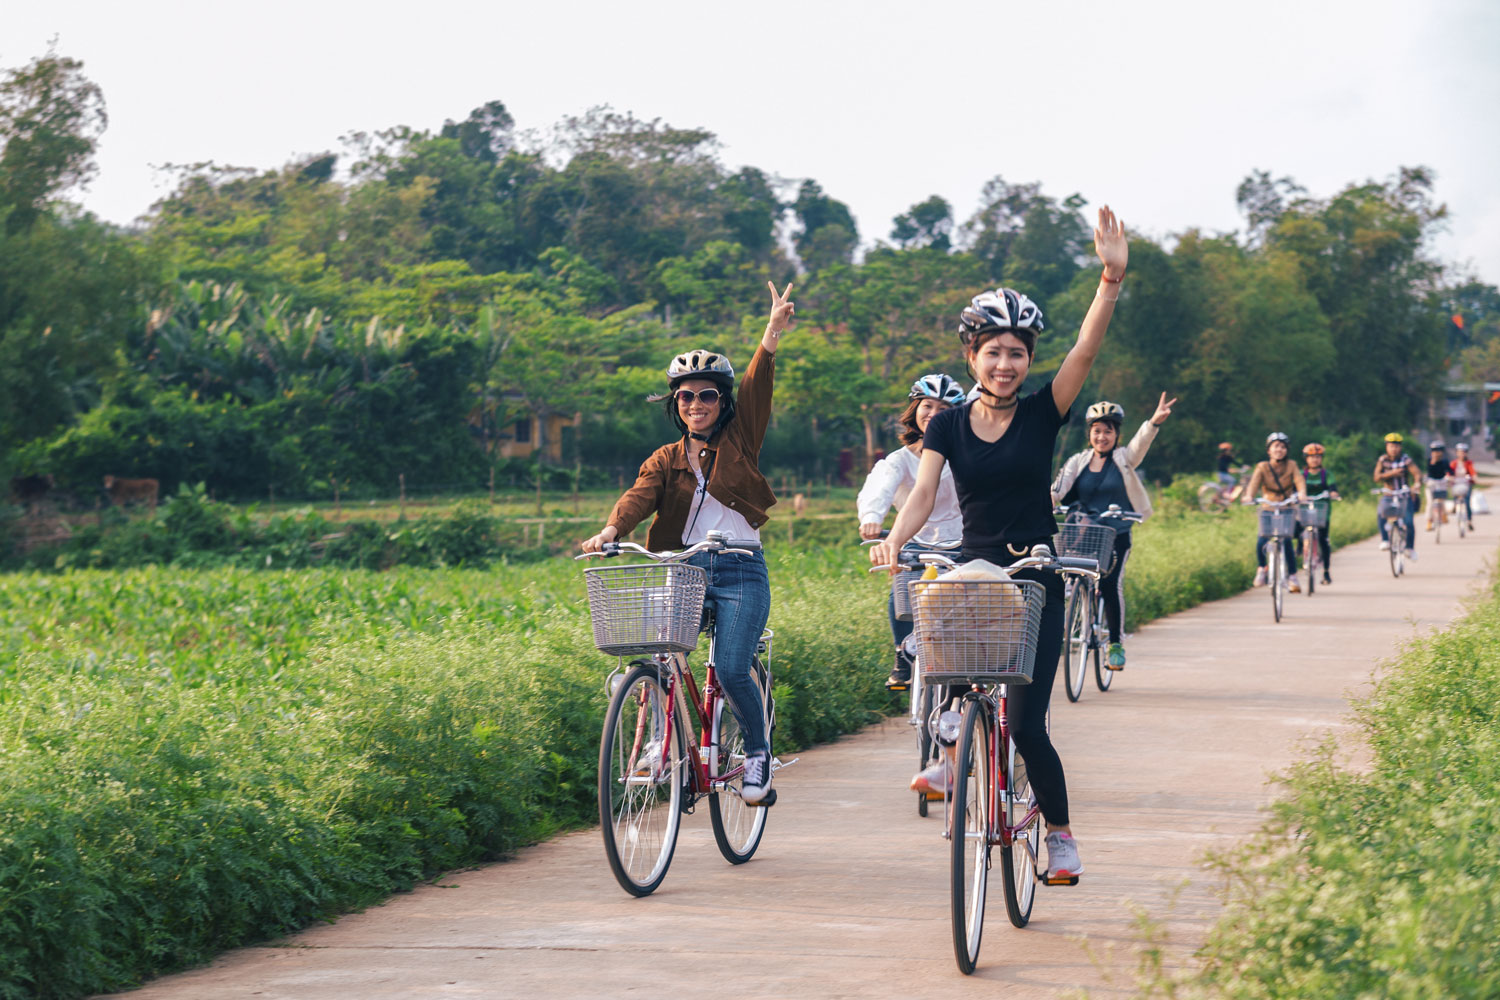 Cycling around Chay Lap Farmstay is a great way to get some exercise, enjoy the fresh air, and learn about Vietnamese culture.